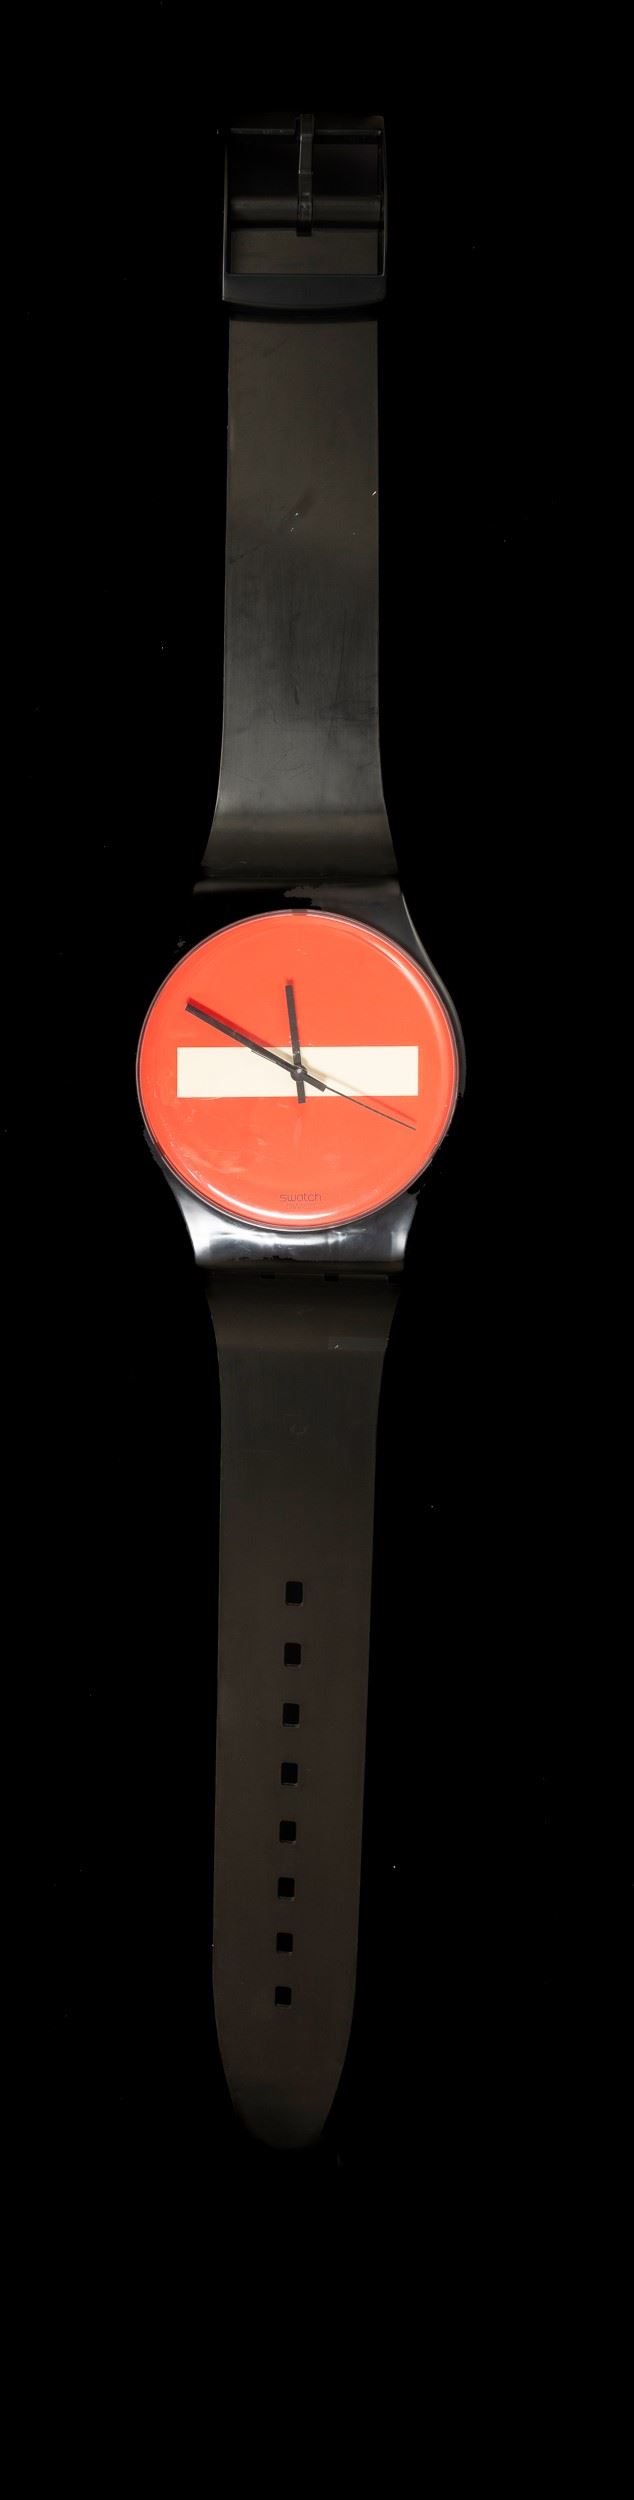 Orologio Swatch.  - Auction POP Culture and Vintage Posters - Cambi Casa d'Aste